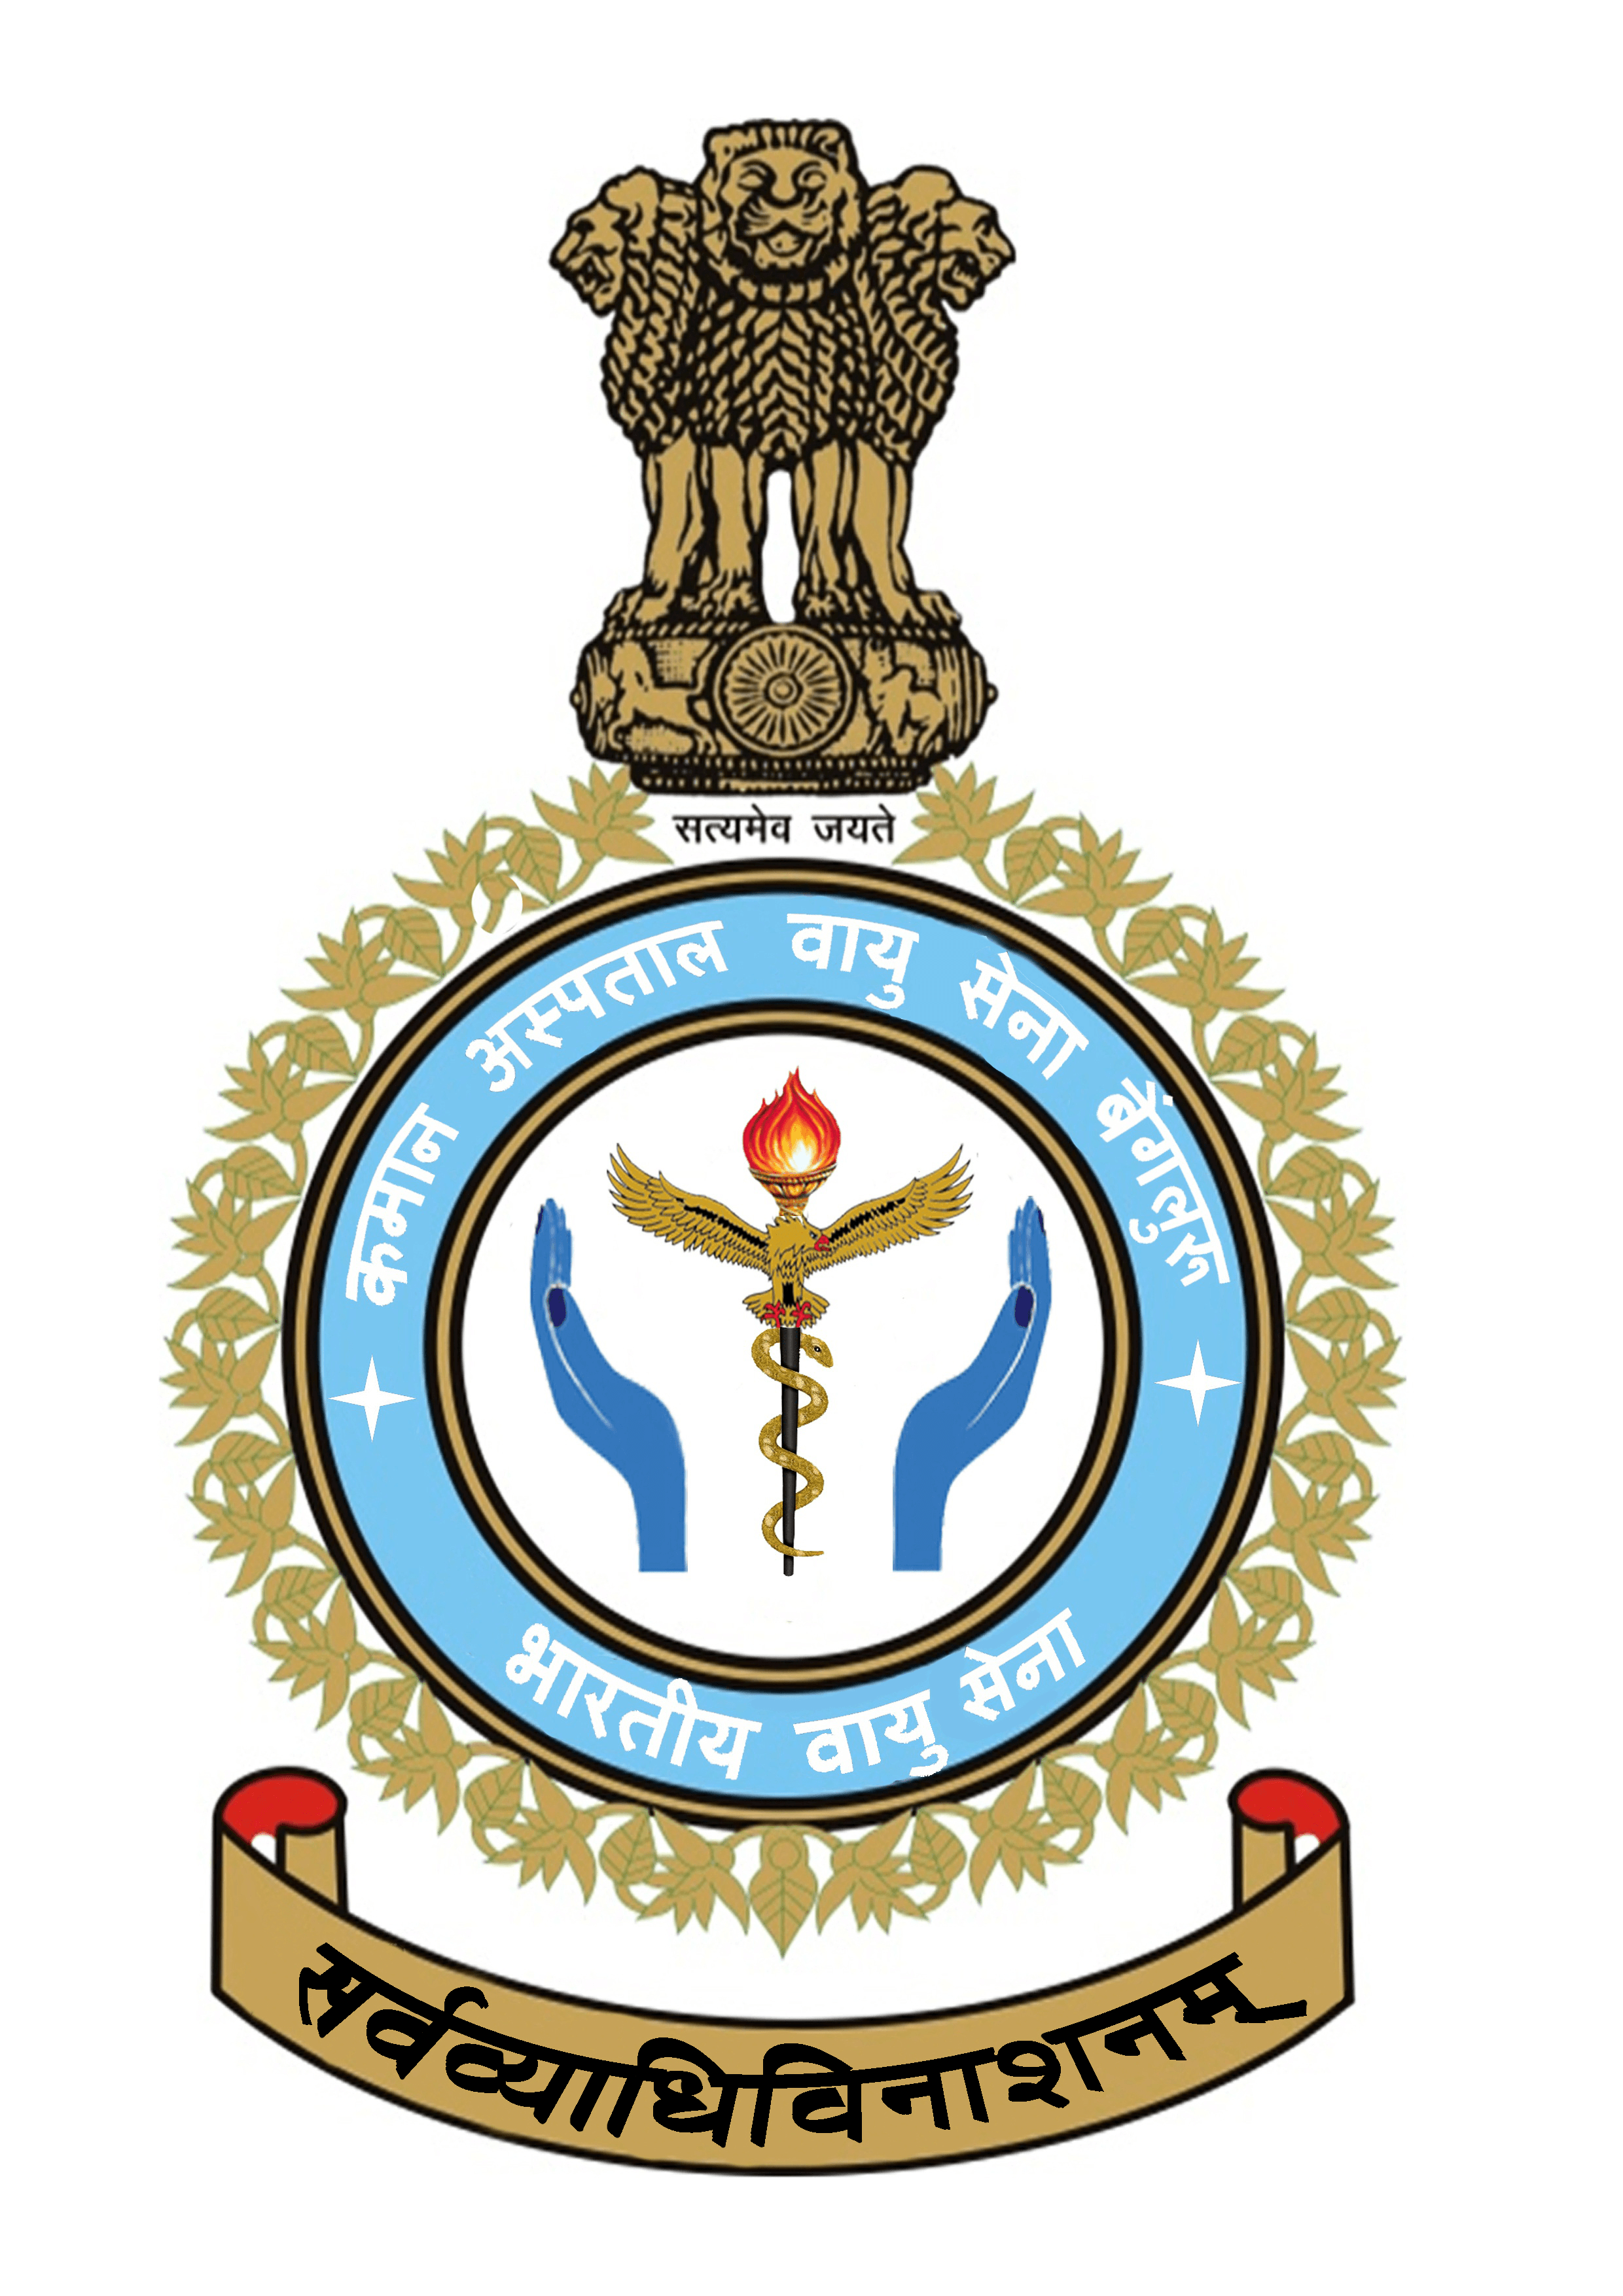 The Department of Air Force Logo - COMMAND HOSPITAL AIR FORCE BANGALORE | Indian Air Force | Government ...